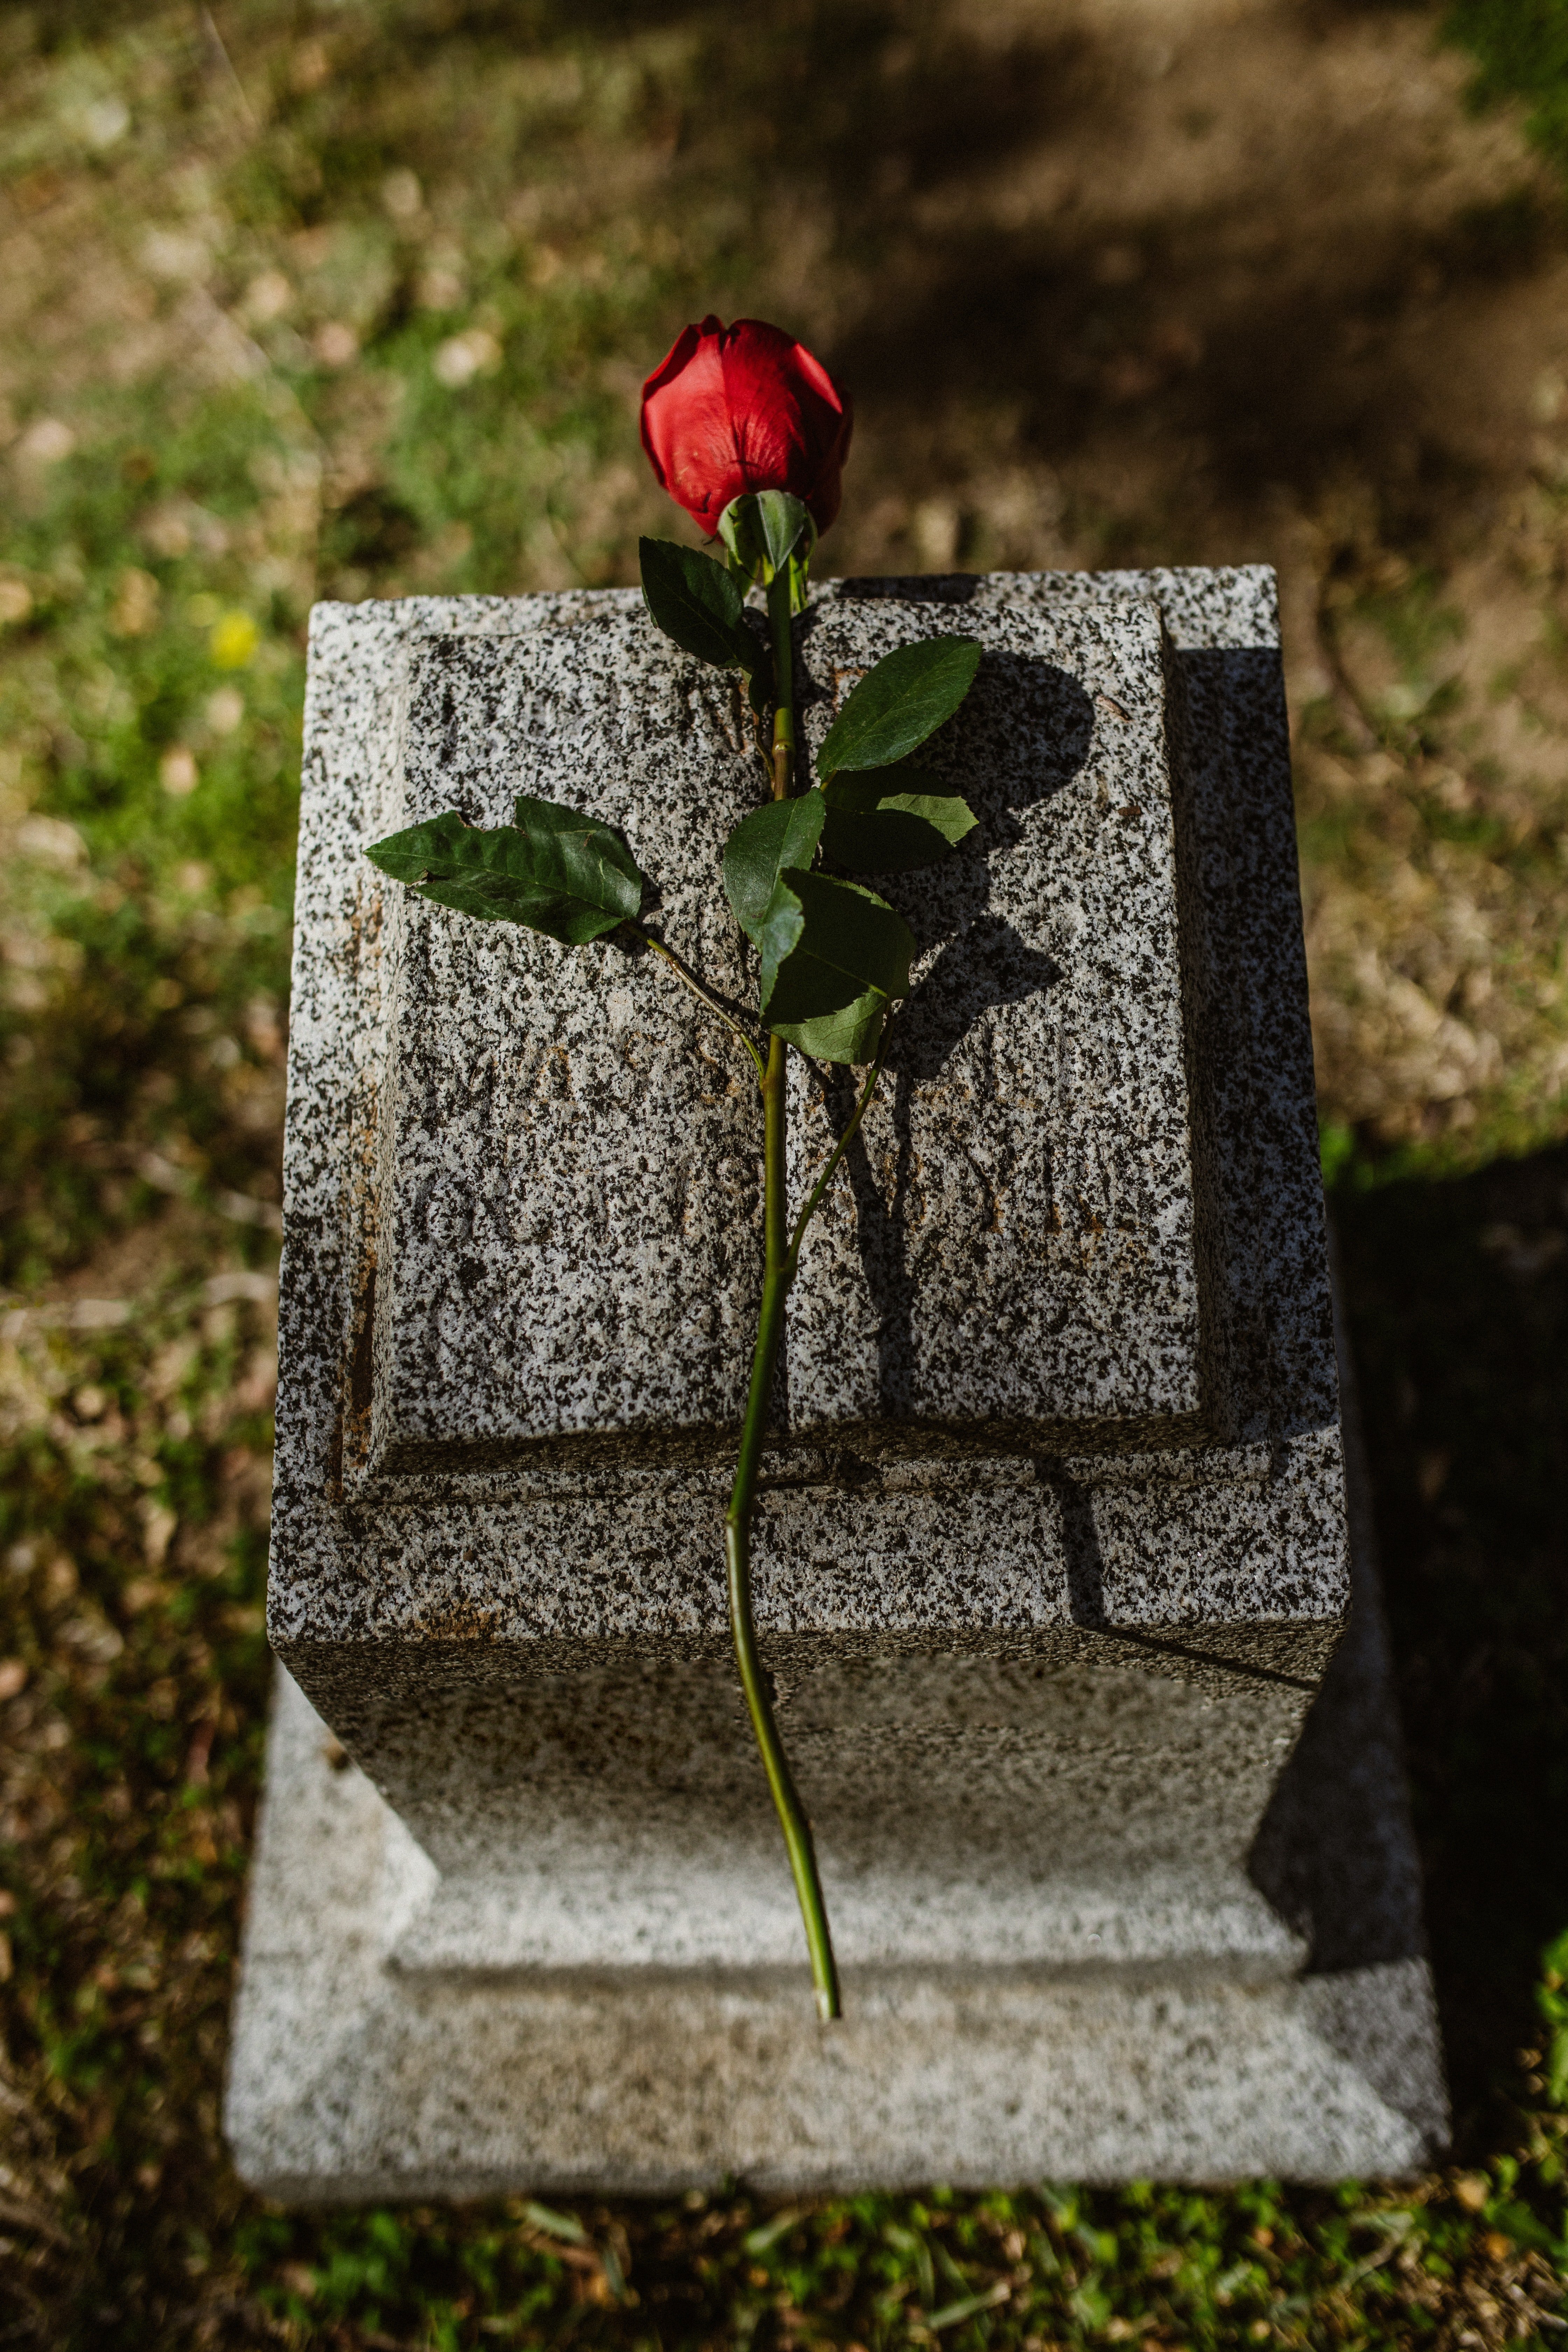 A red rose lying on a gravestone. | Source: Pexels